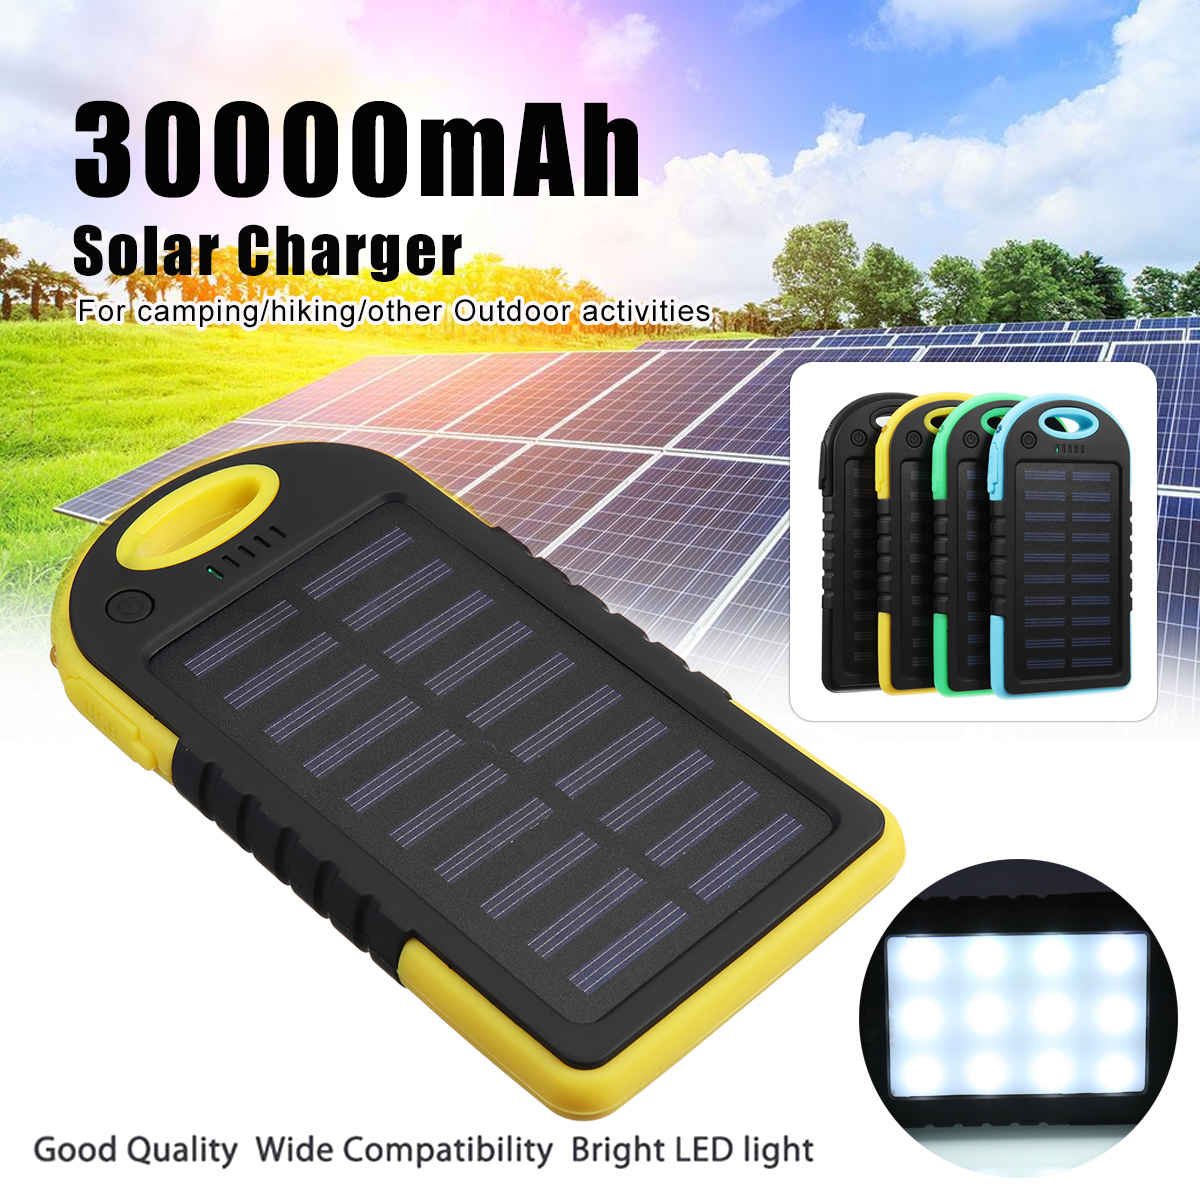 Excellway® Portable 10000mAh Solar Powered System Charger USB Battery Charger Case for Camping Outdoor